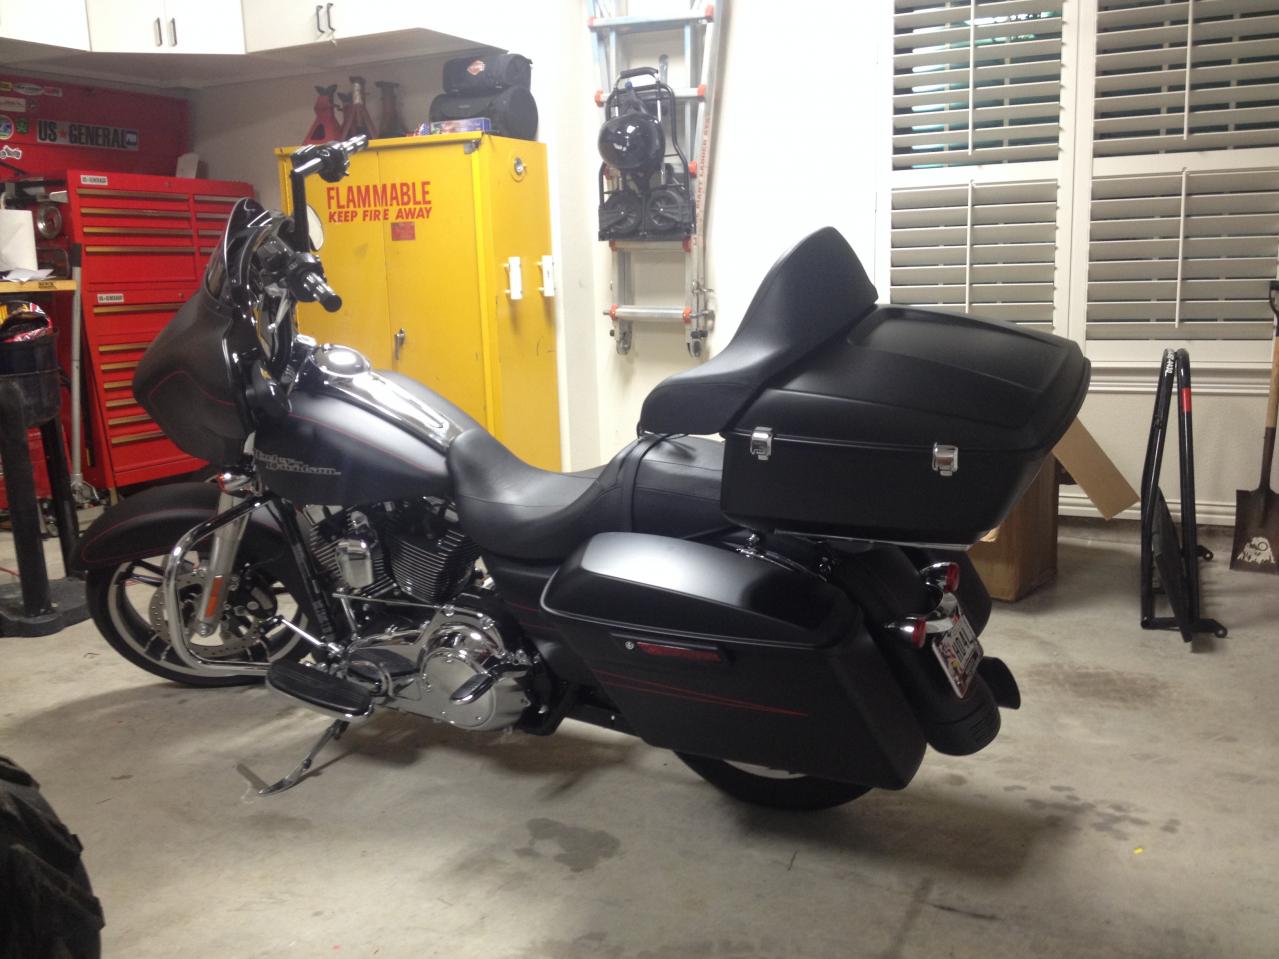 Photos of Your 2014 Street Glide With Tour Pack - Harley Davidson Forums